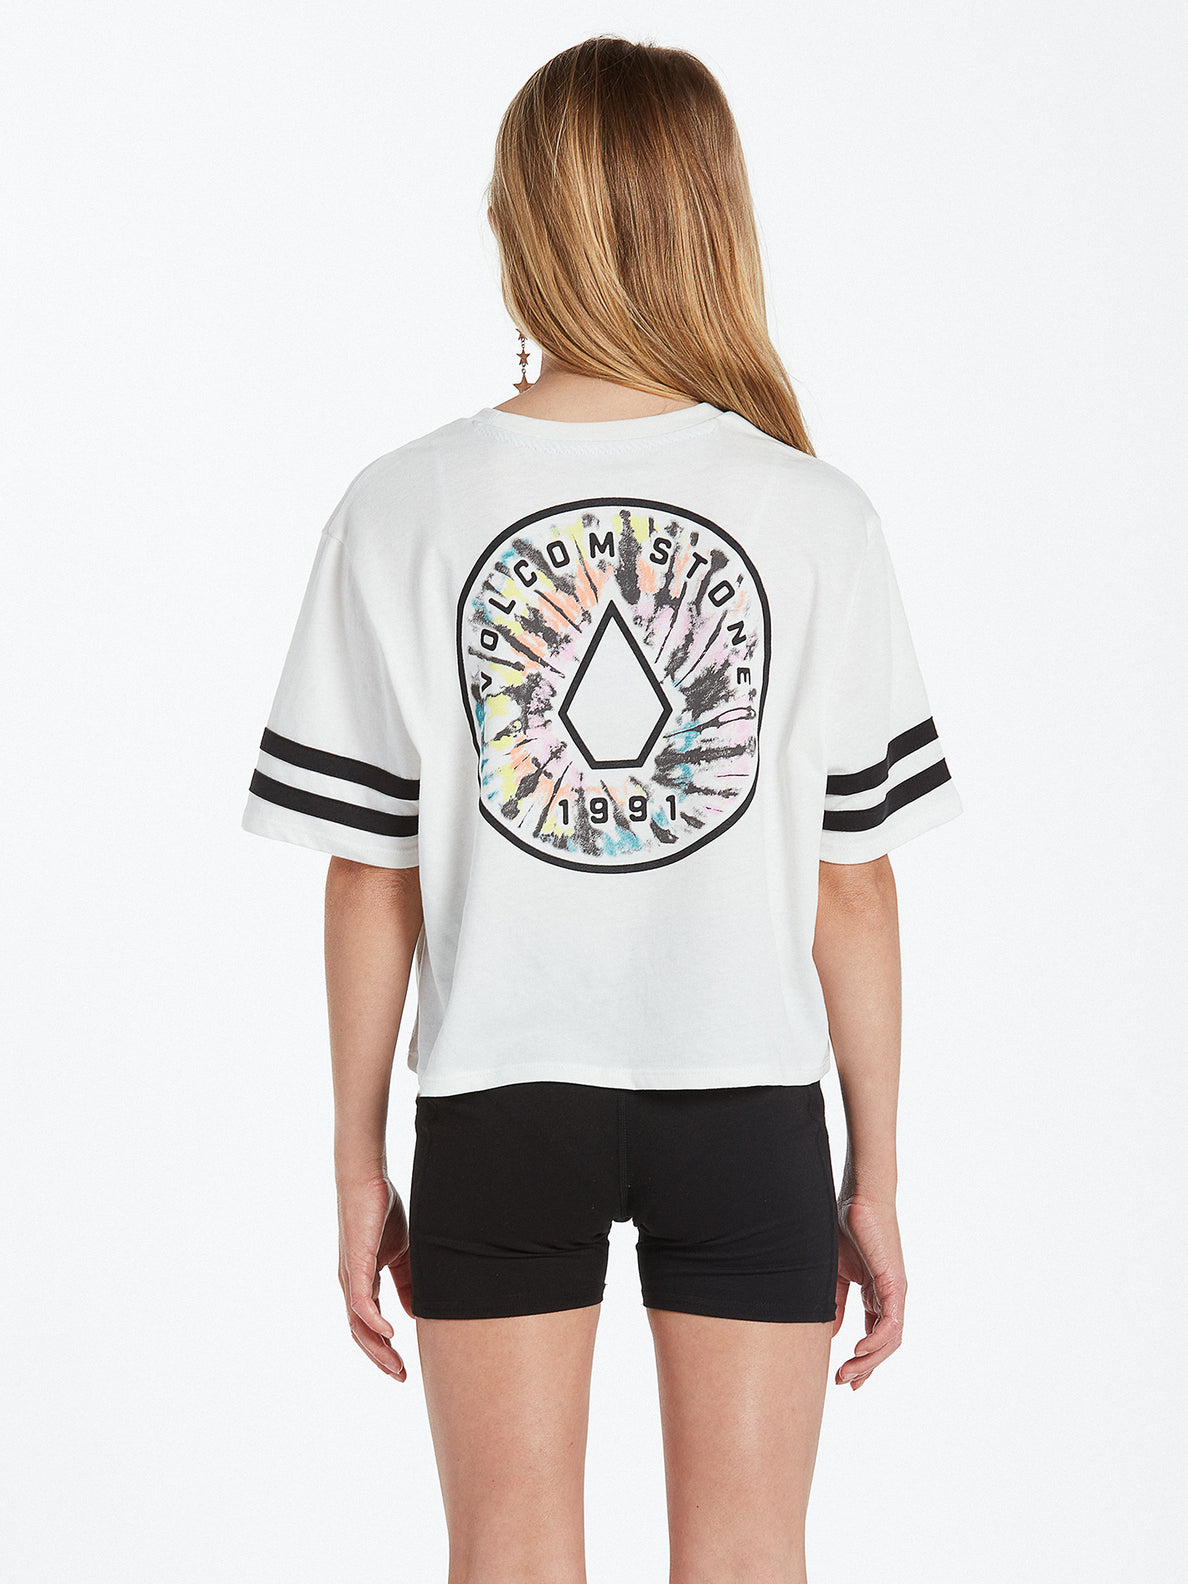 Girls Truly Stoked Short Sleeve Tee - Star White (R3512201_SWH) [B]